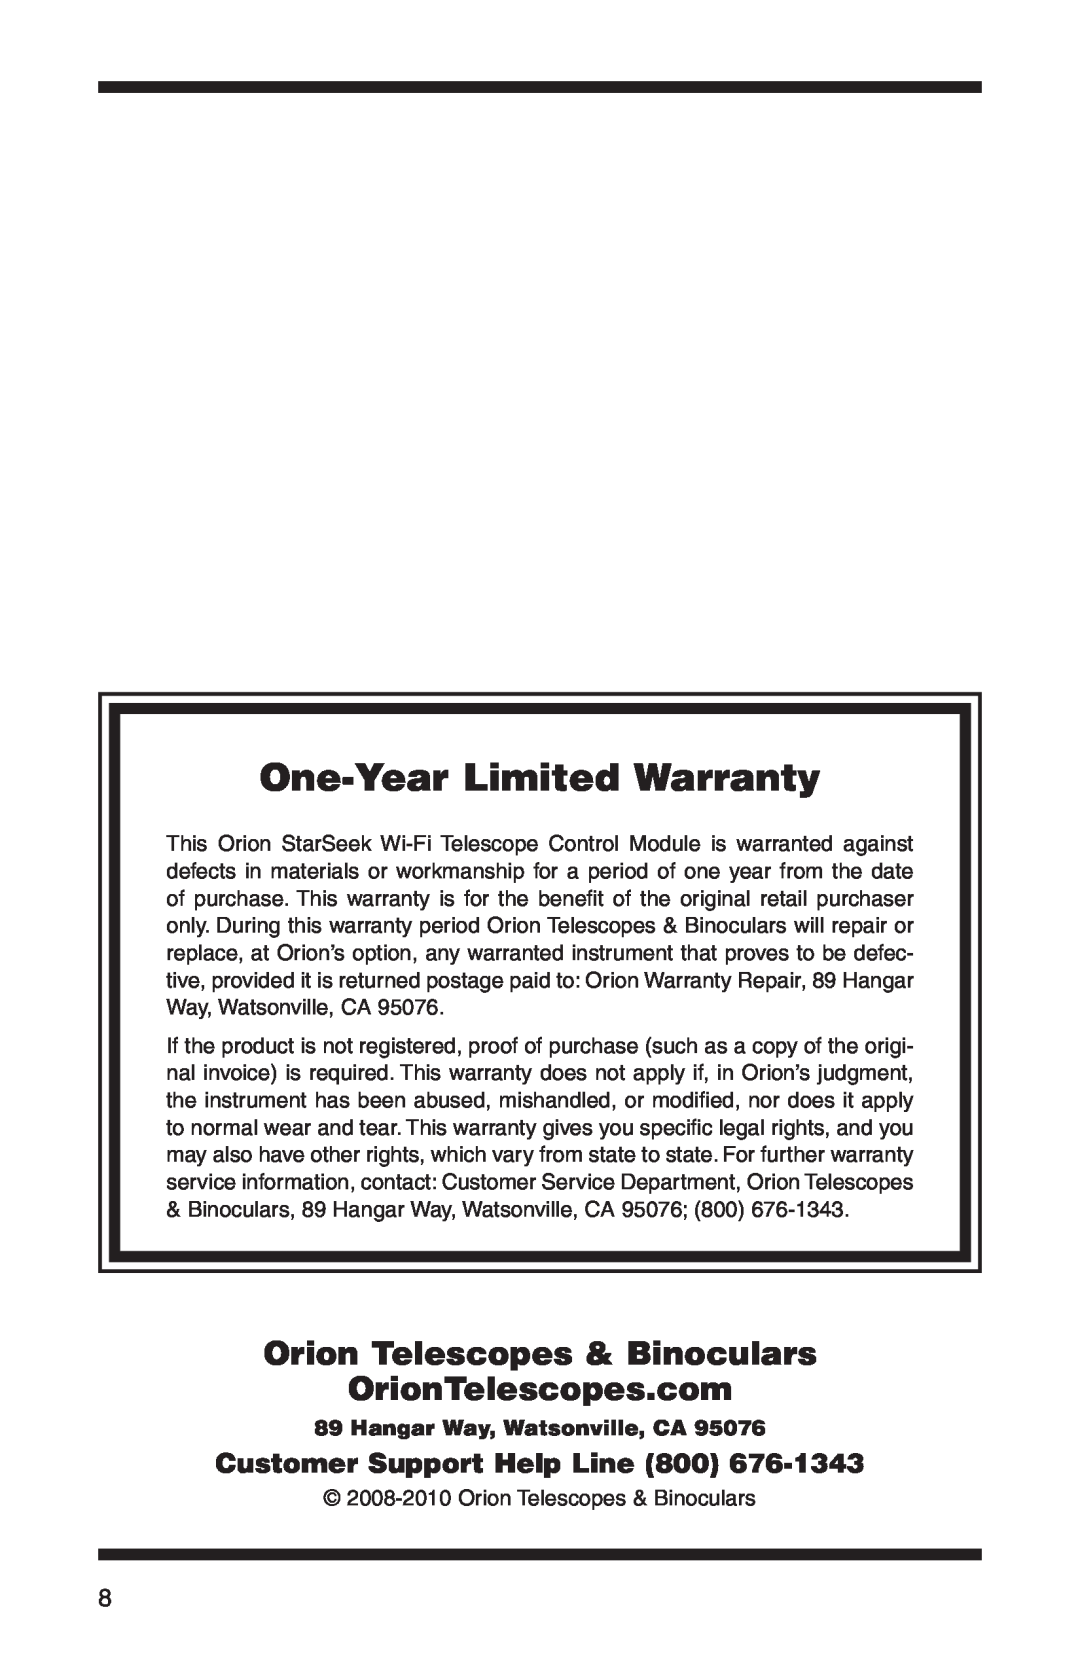 Orion 5685 One-Year Limited Warranty, Customer Support Help Line, Orion Telescopes & Binoculars OrionTelescopes.com 